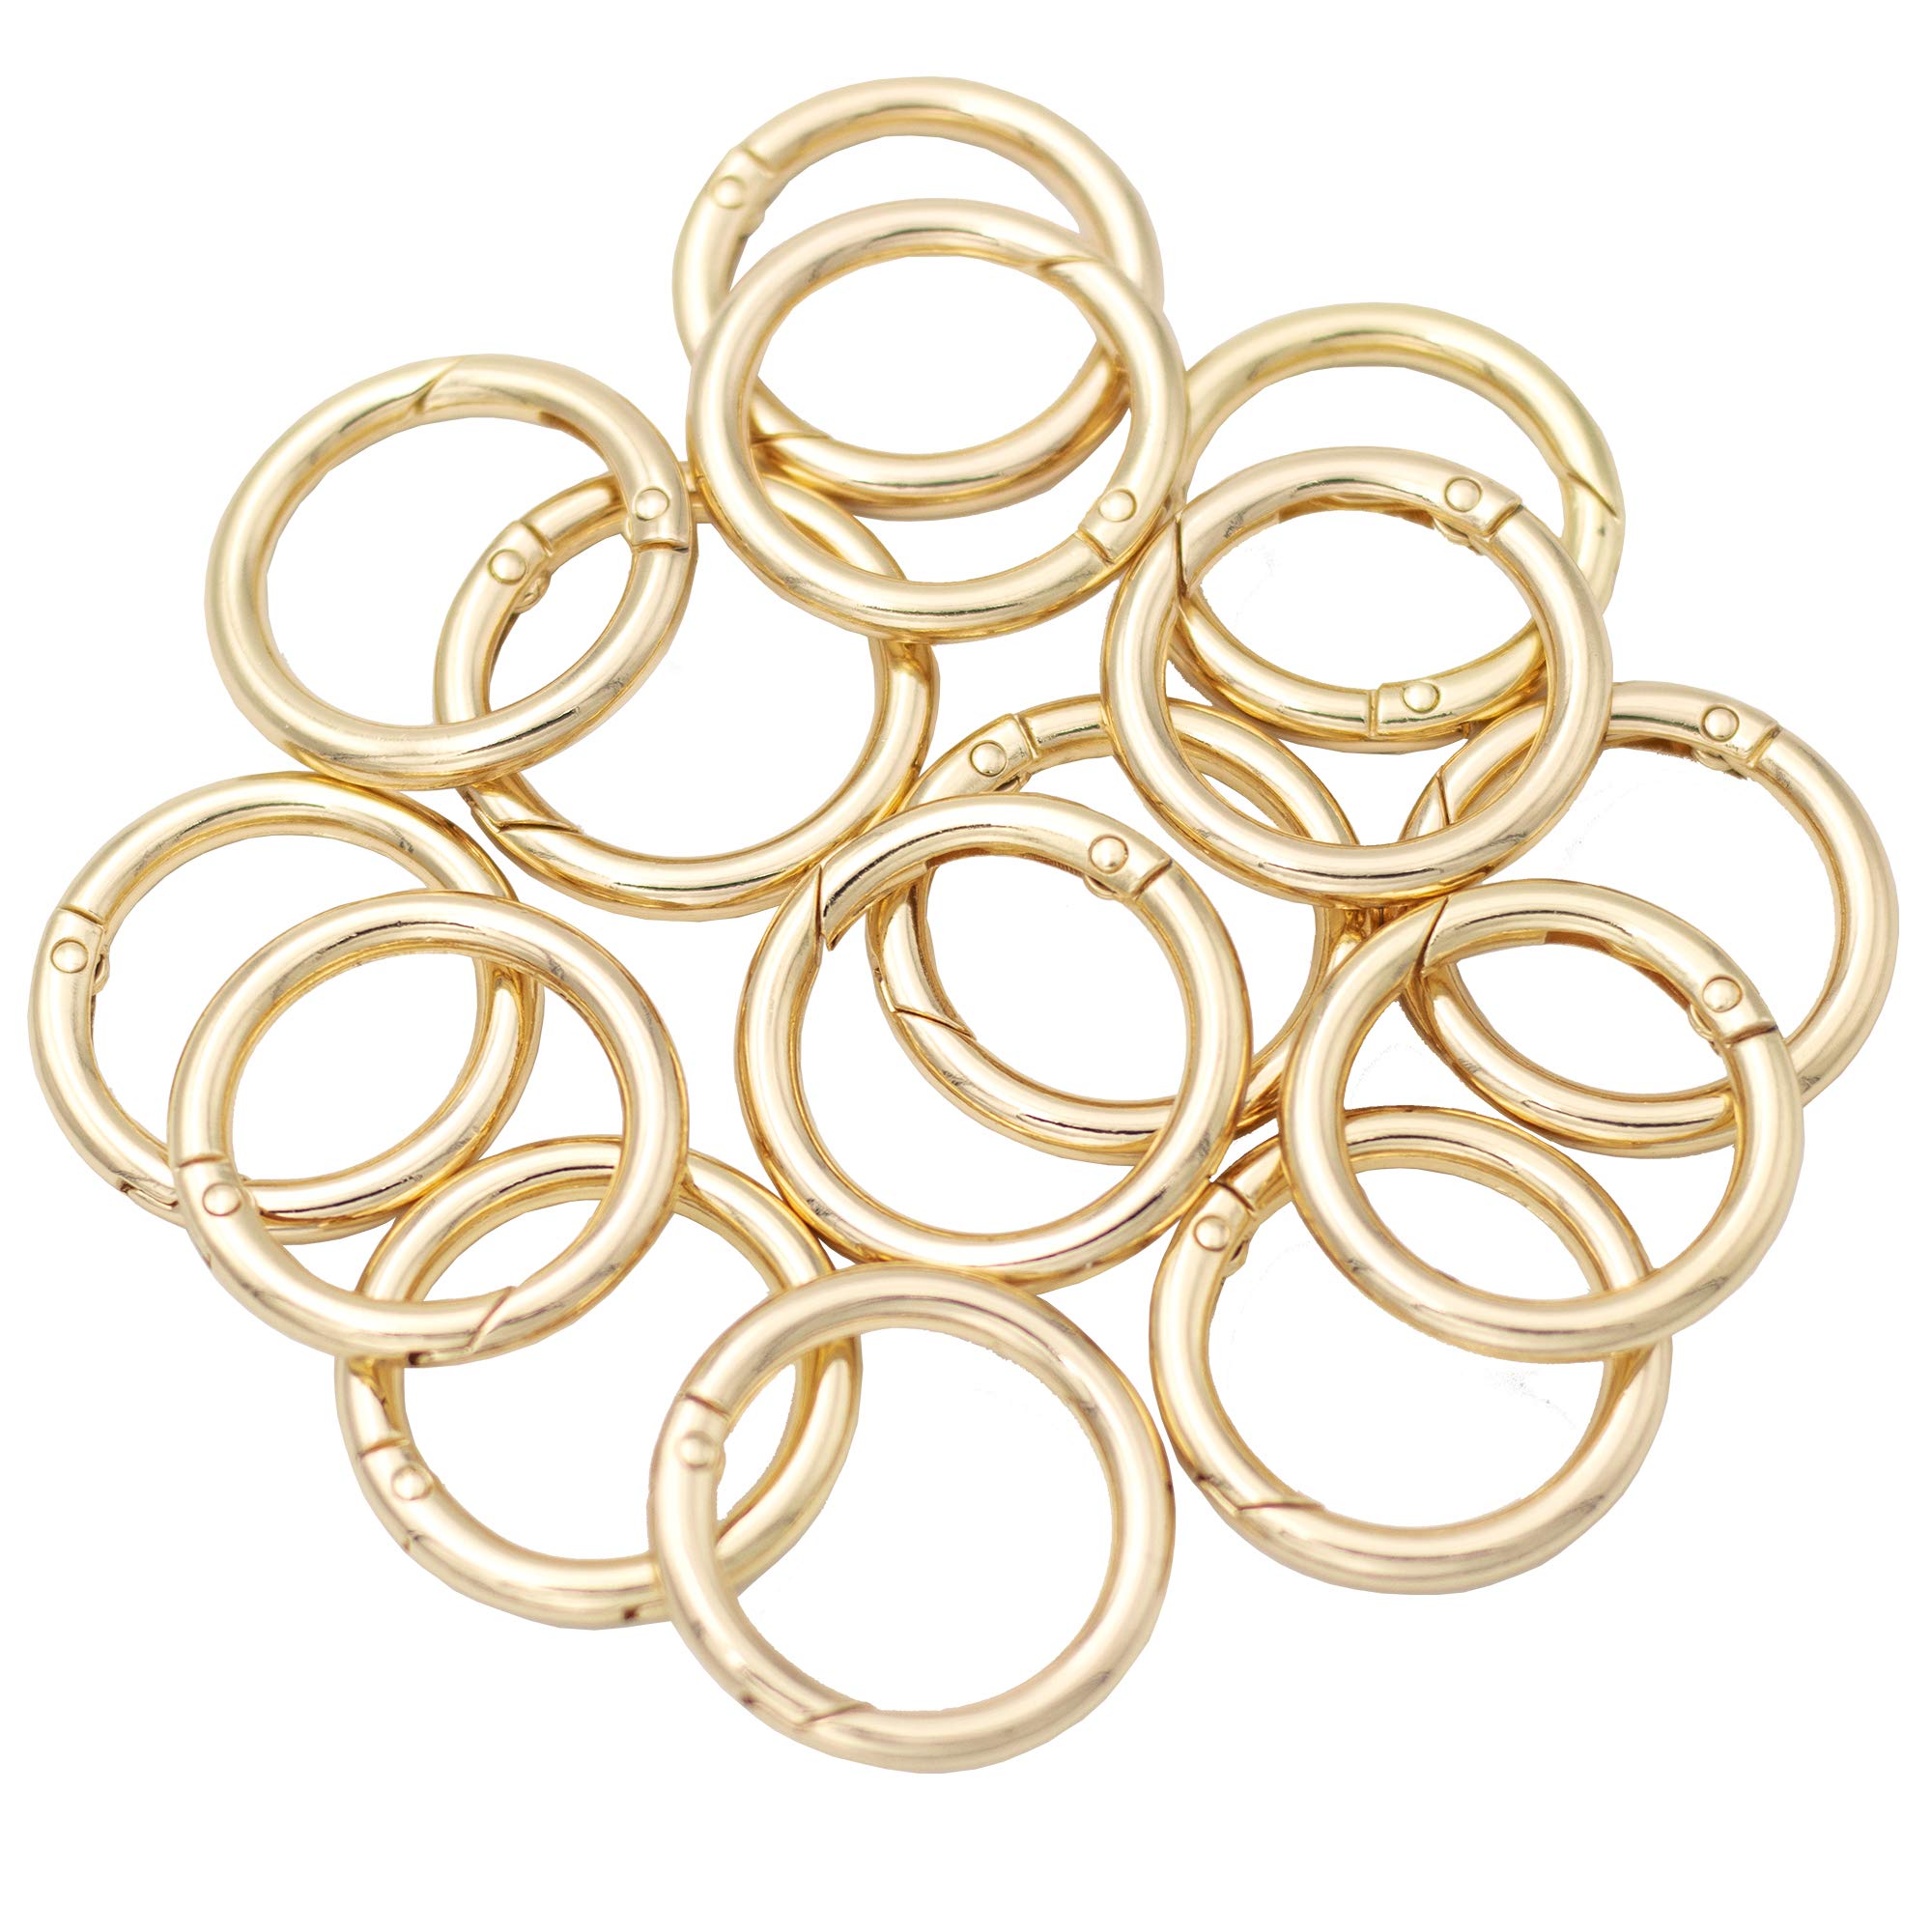 JWBIZ 15pcs Trigger Spring O Rings Round Carabiner Clip Snap for Keyrings Buckle, Bags,Purses (Gold, 1 inch)